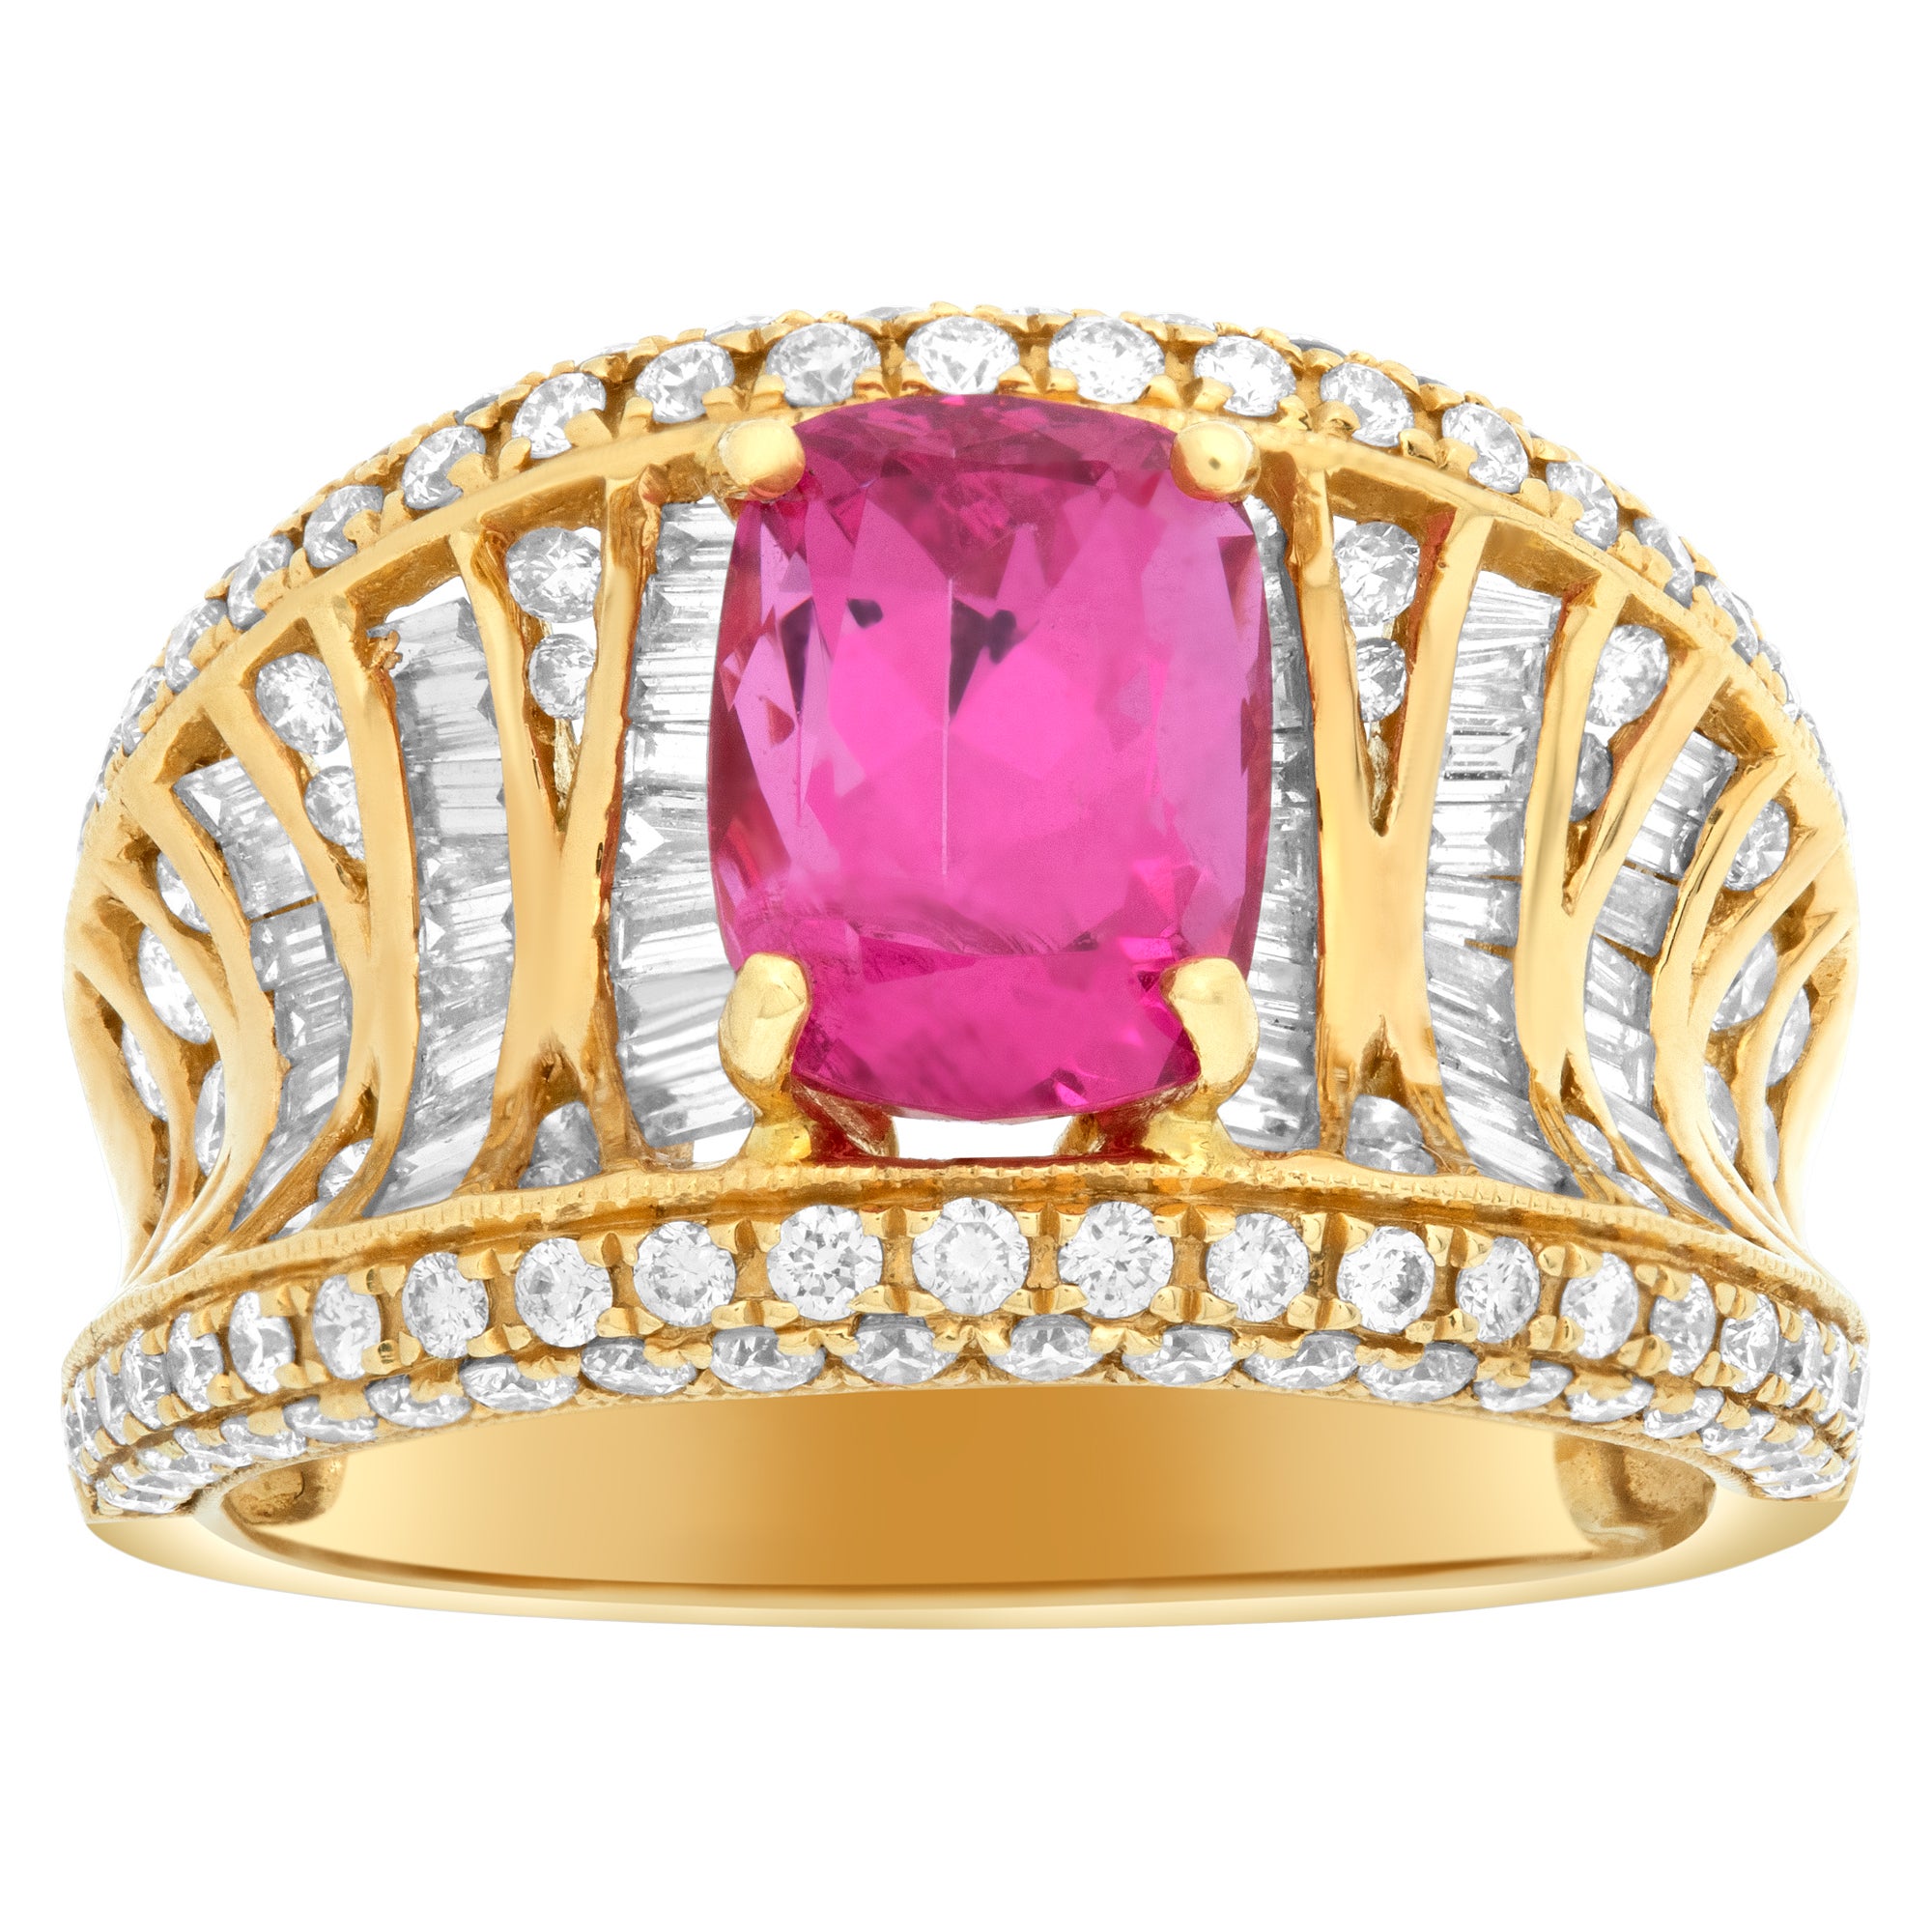 18k yellow gold ring with Oval brilliant cut pink spinel (2.73 carats) & diamond For Sale